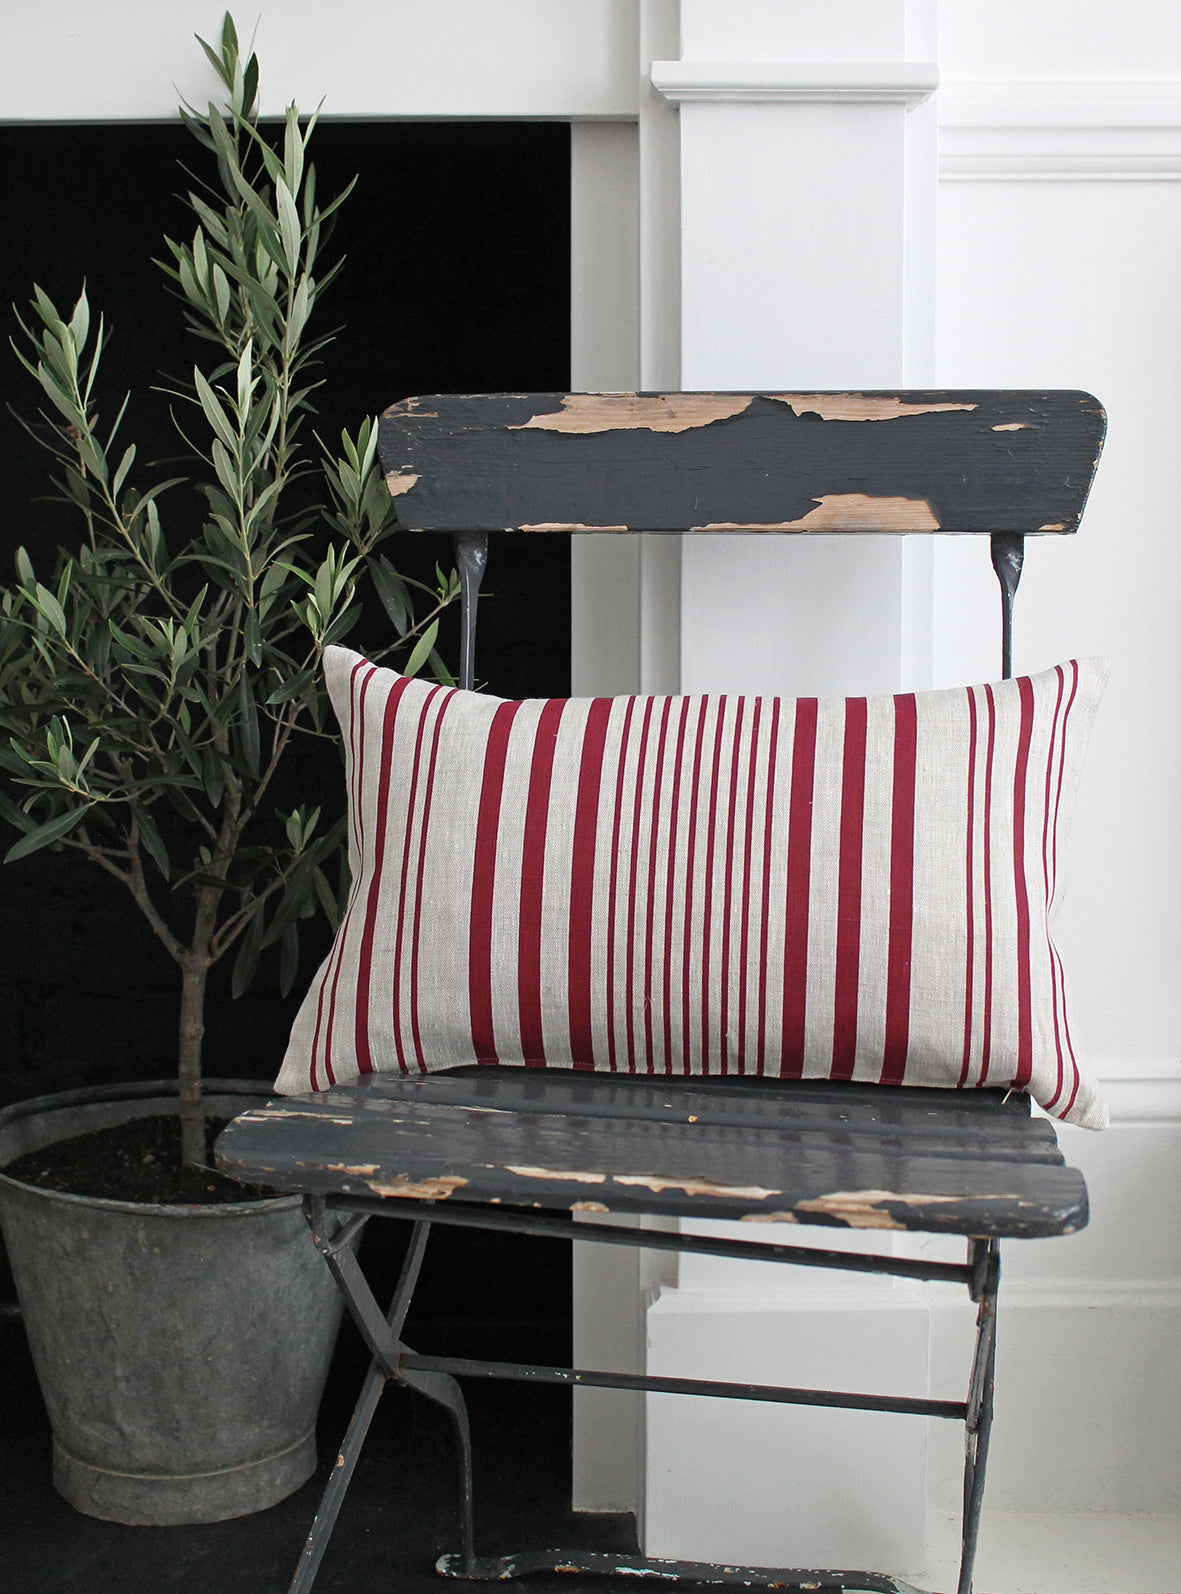 Stanley Stripe French Raspberry Scatter Cushion